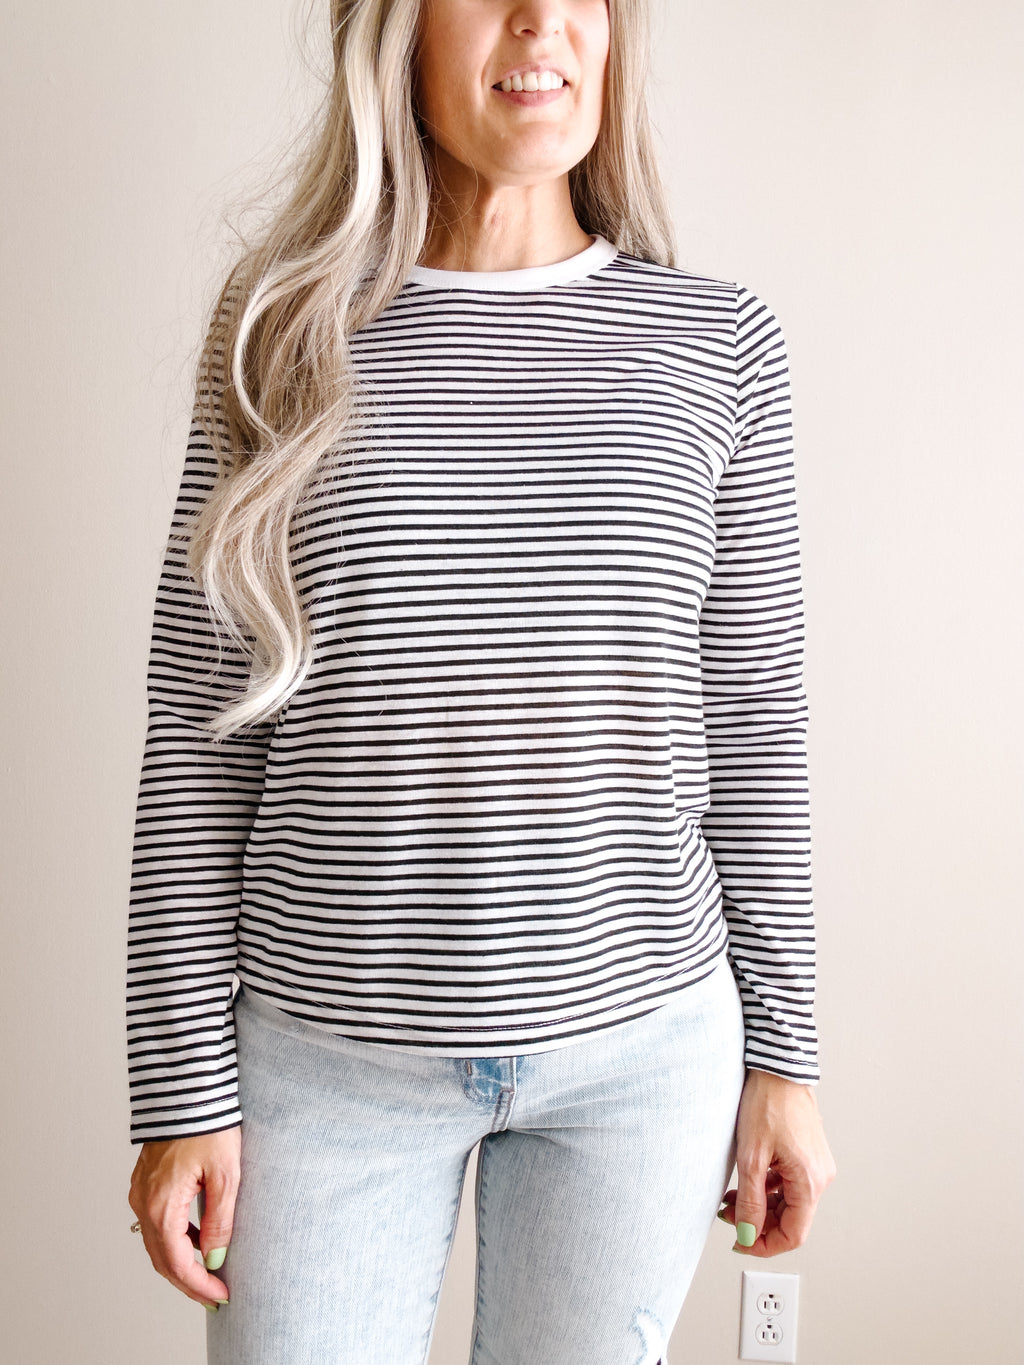 *•Black and White Striped Top